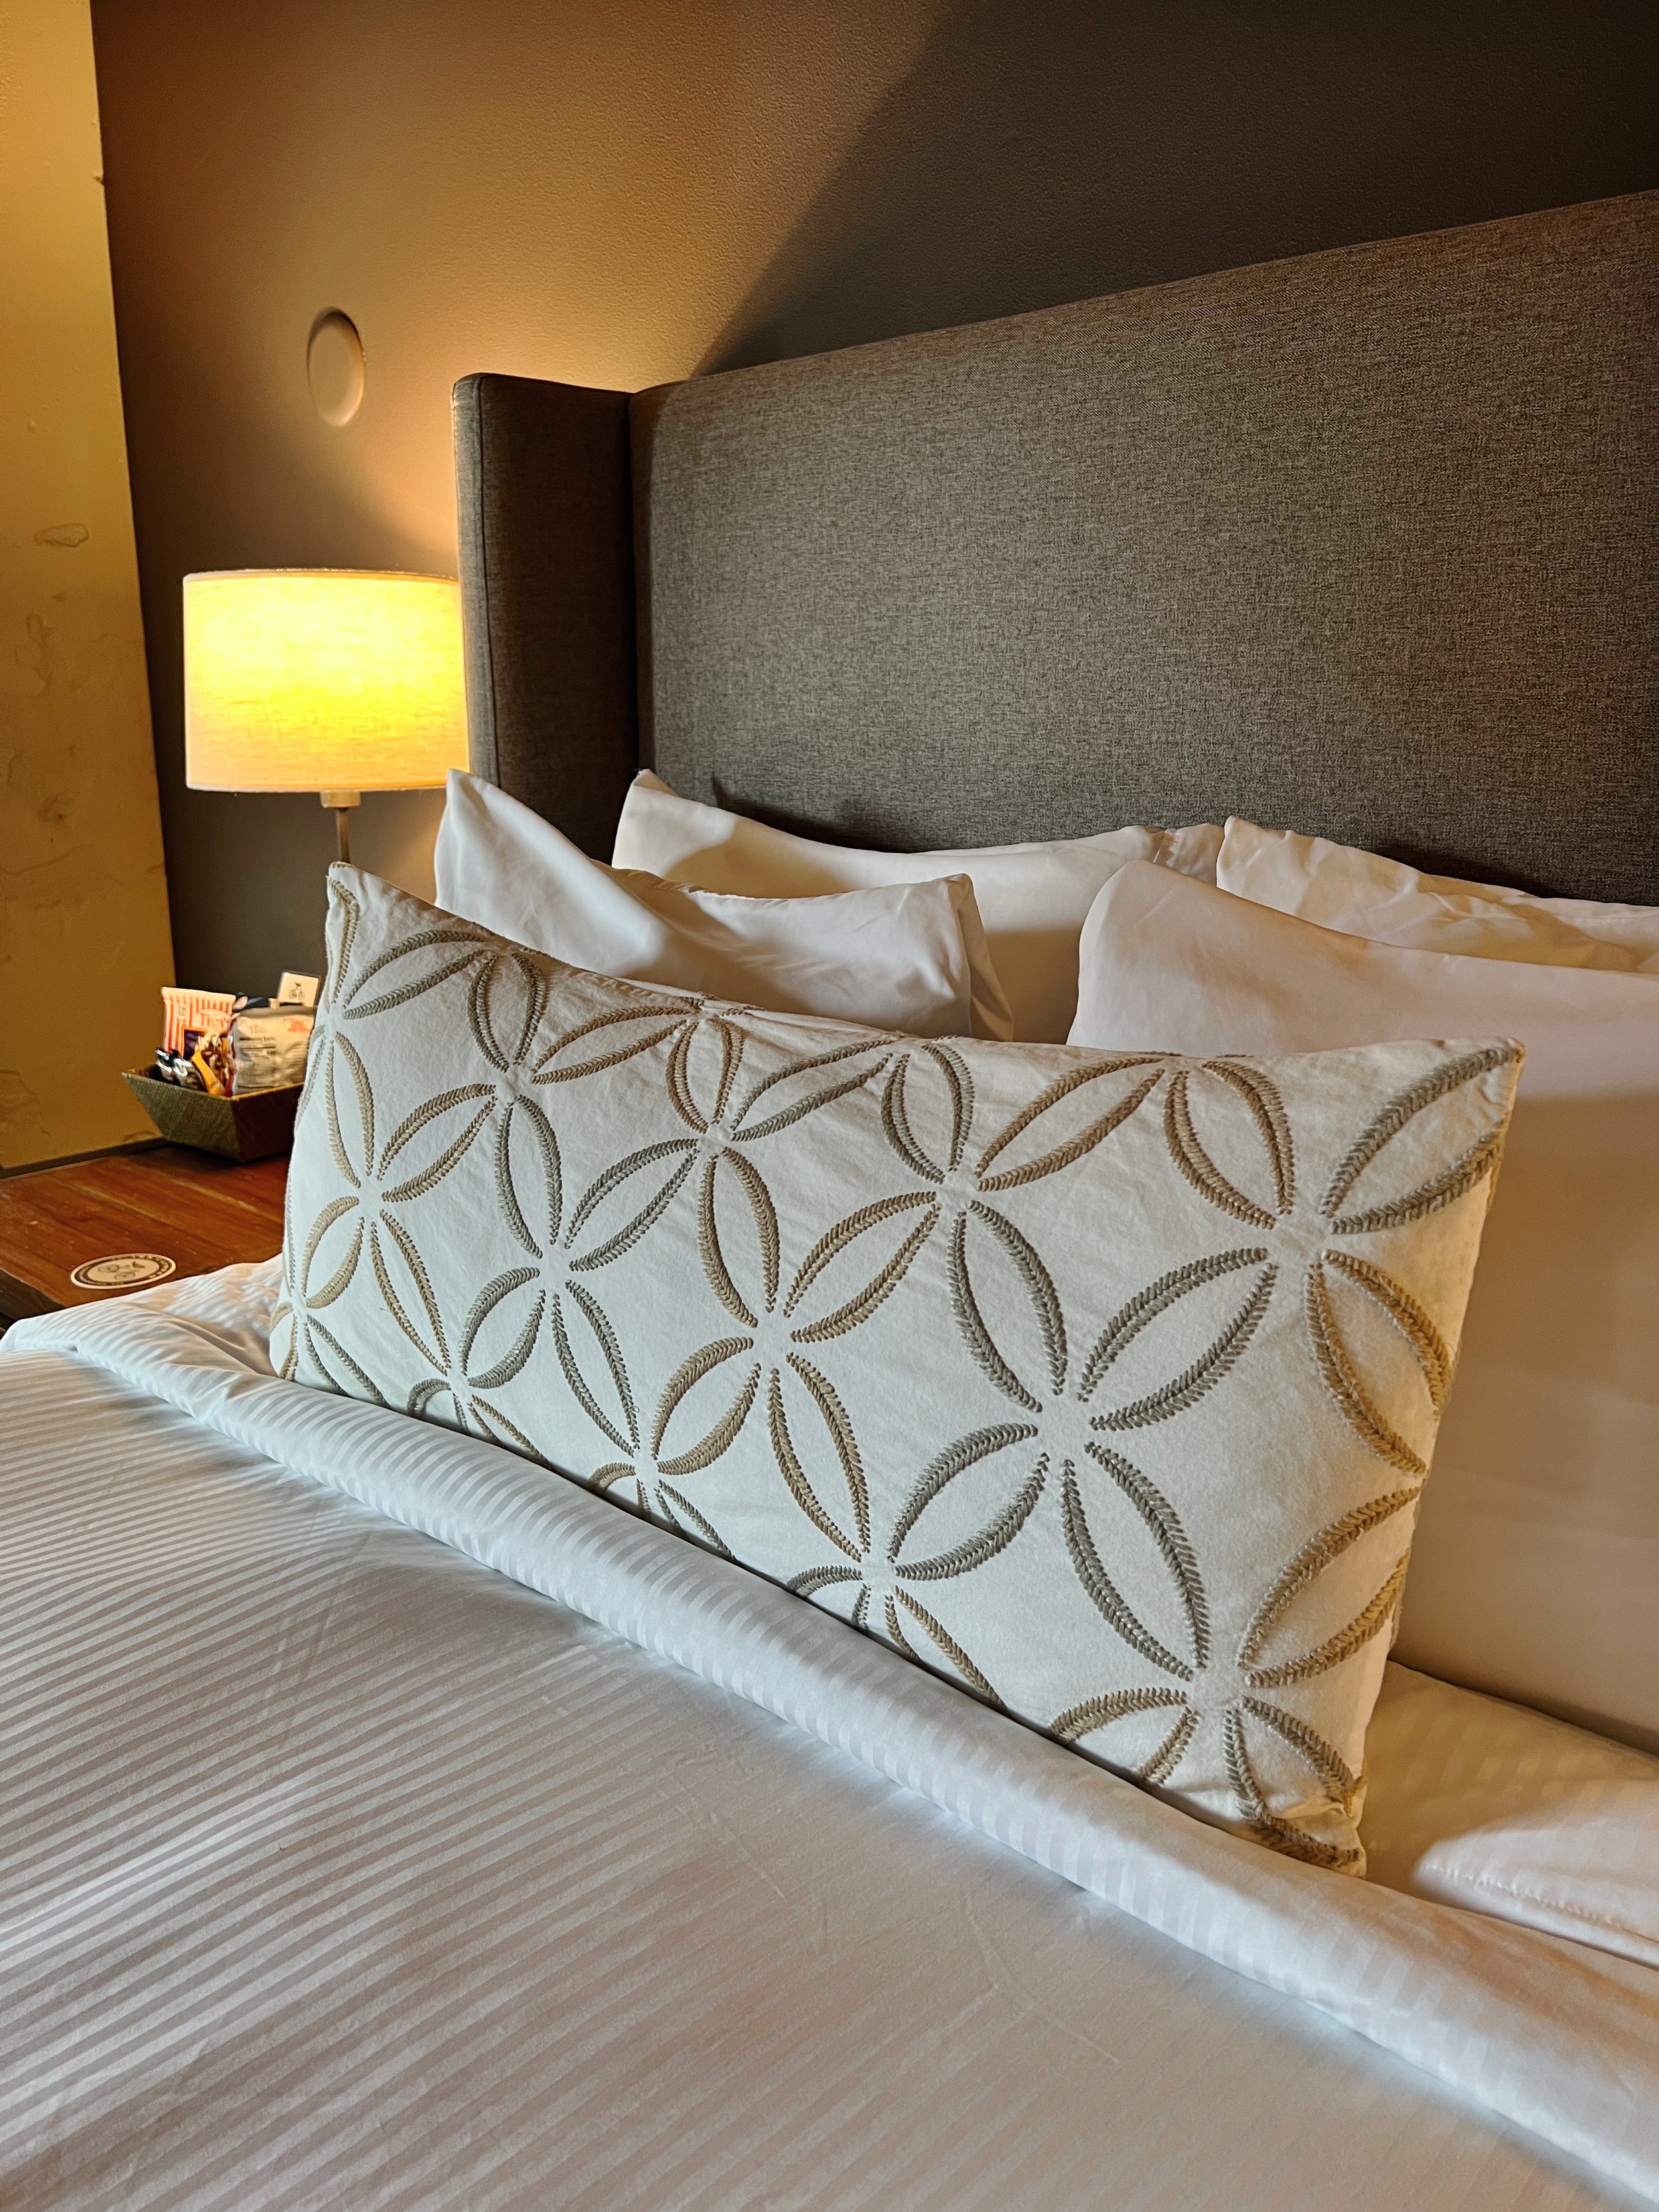 luxurious bedding at the inn at Lynden